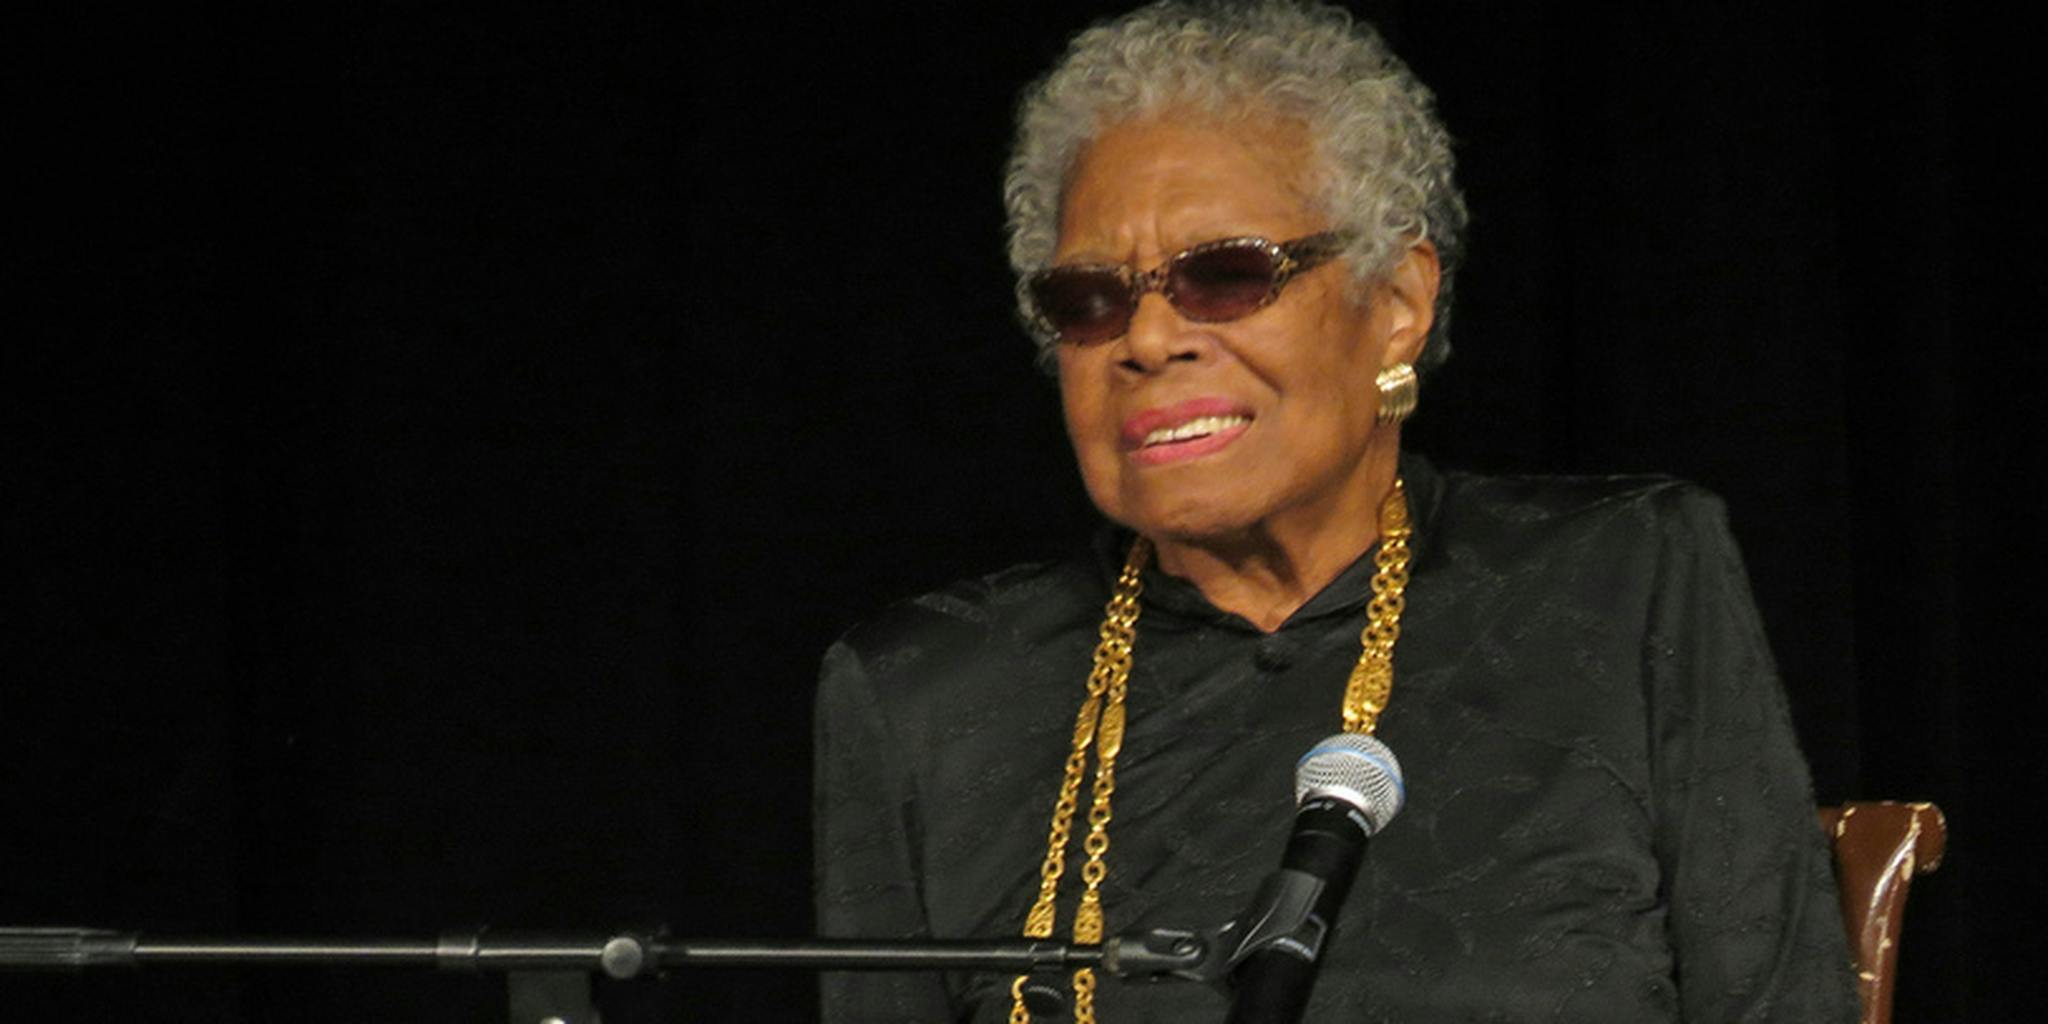 Conservatives are now bashing Maya Angelou on Twitter